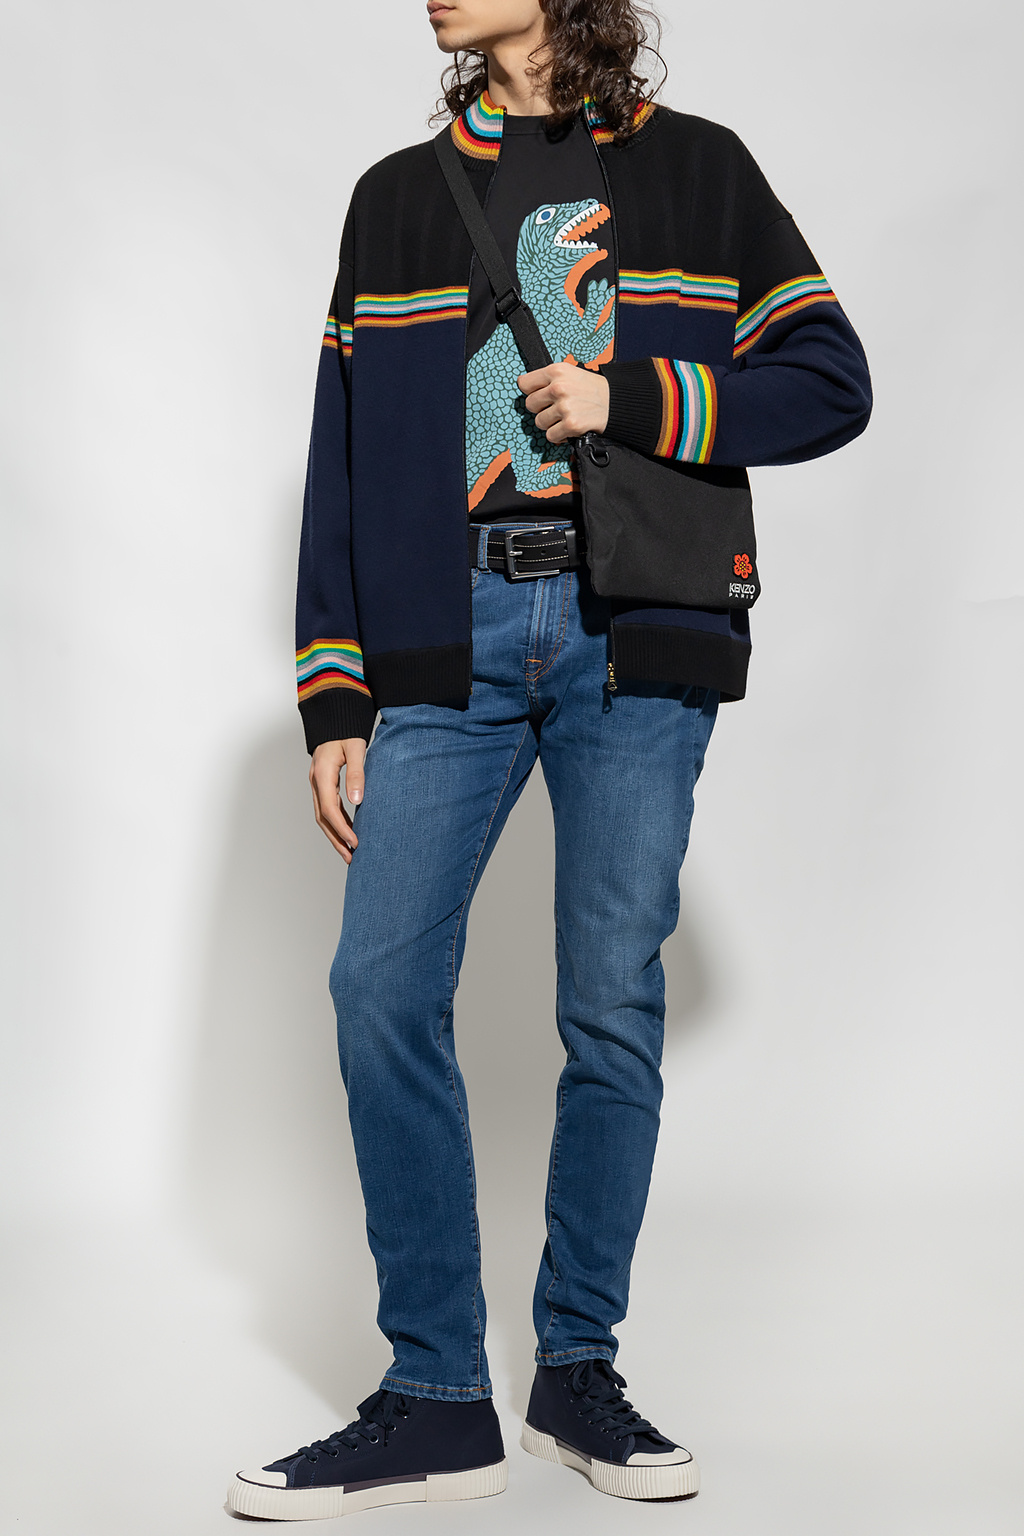 PS Paul Smith Женские сапоги pepe jeans